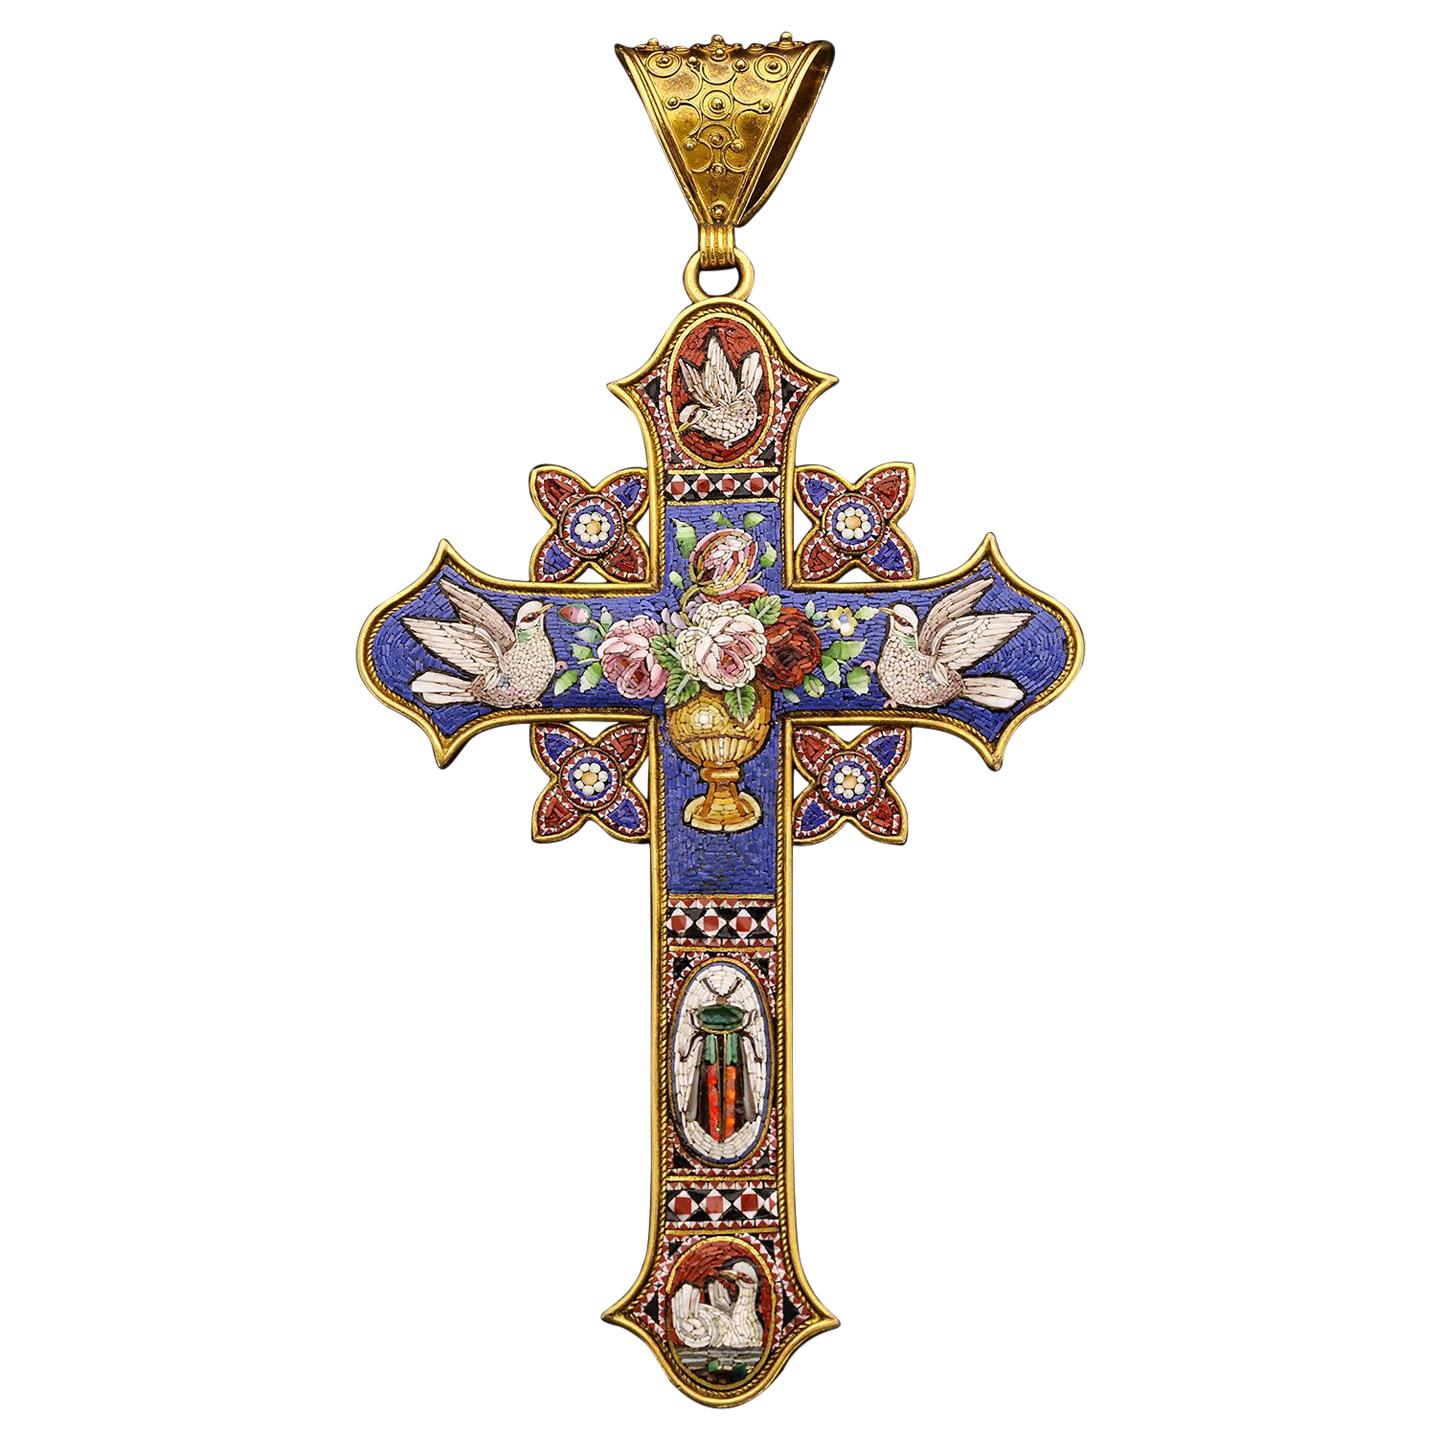 Antique 19th Century French Gold and Micromosaic Cross Pendant, circa 1880